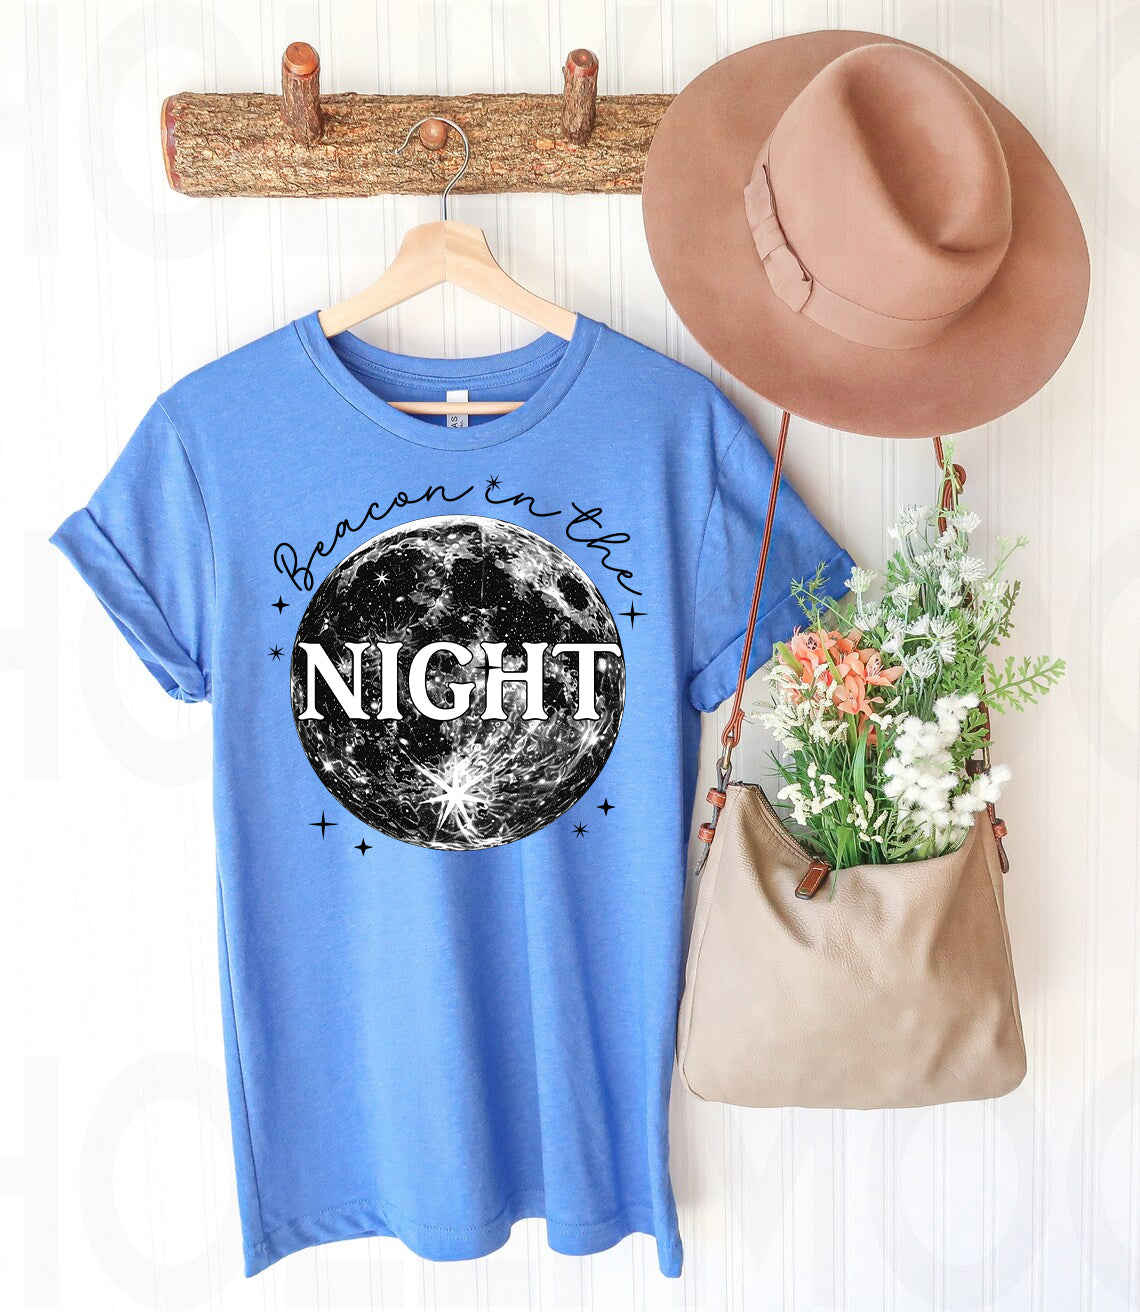 Beacon in the Night - Graphic Tee